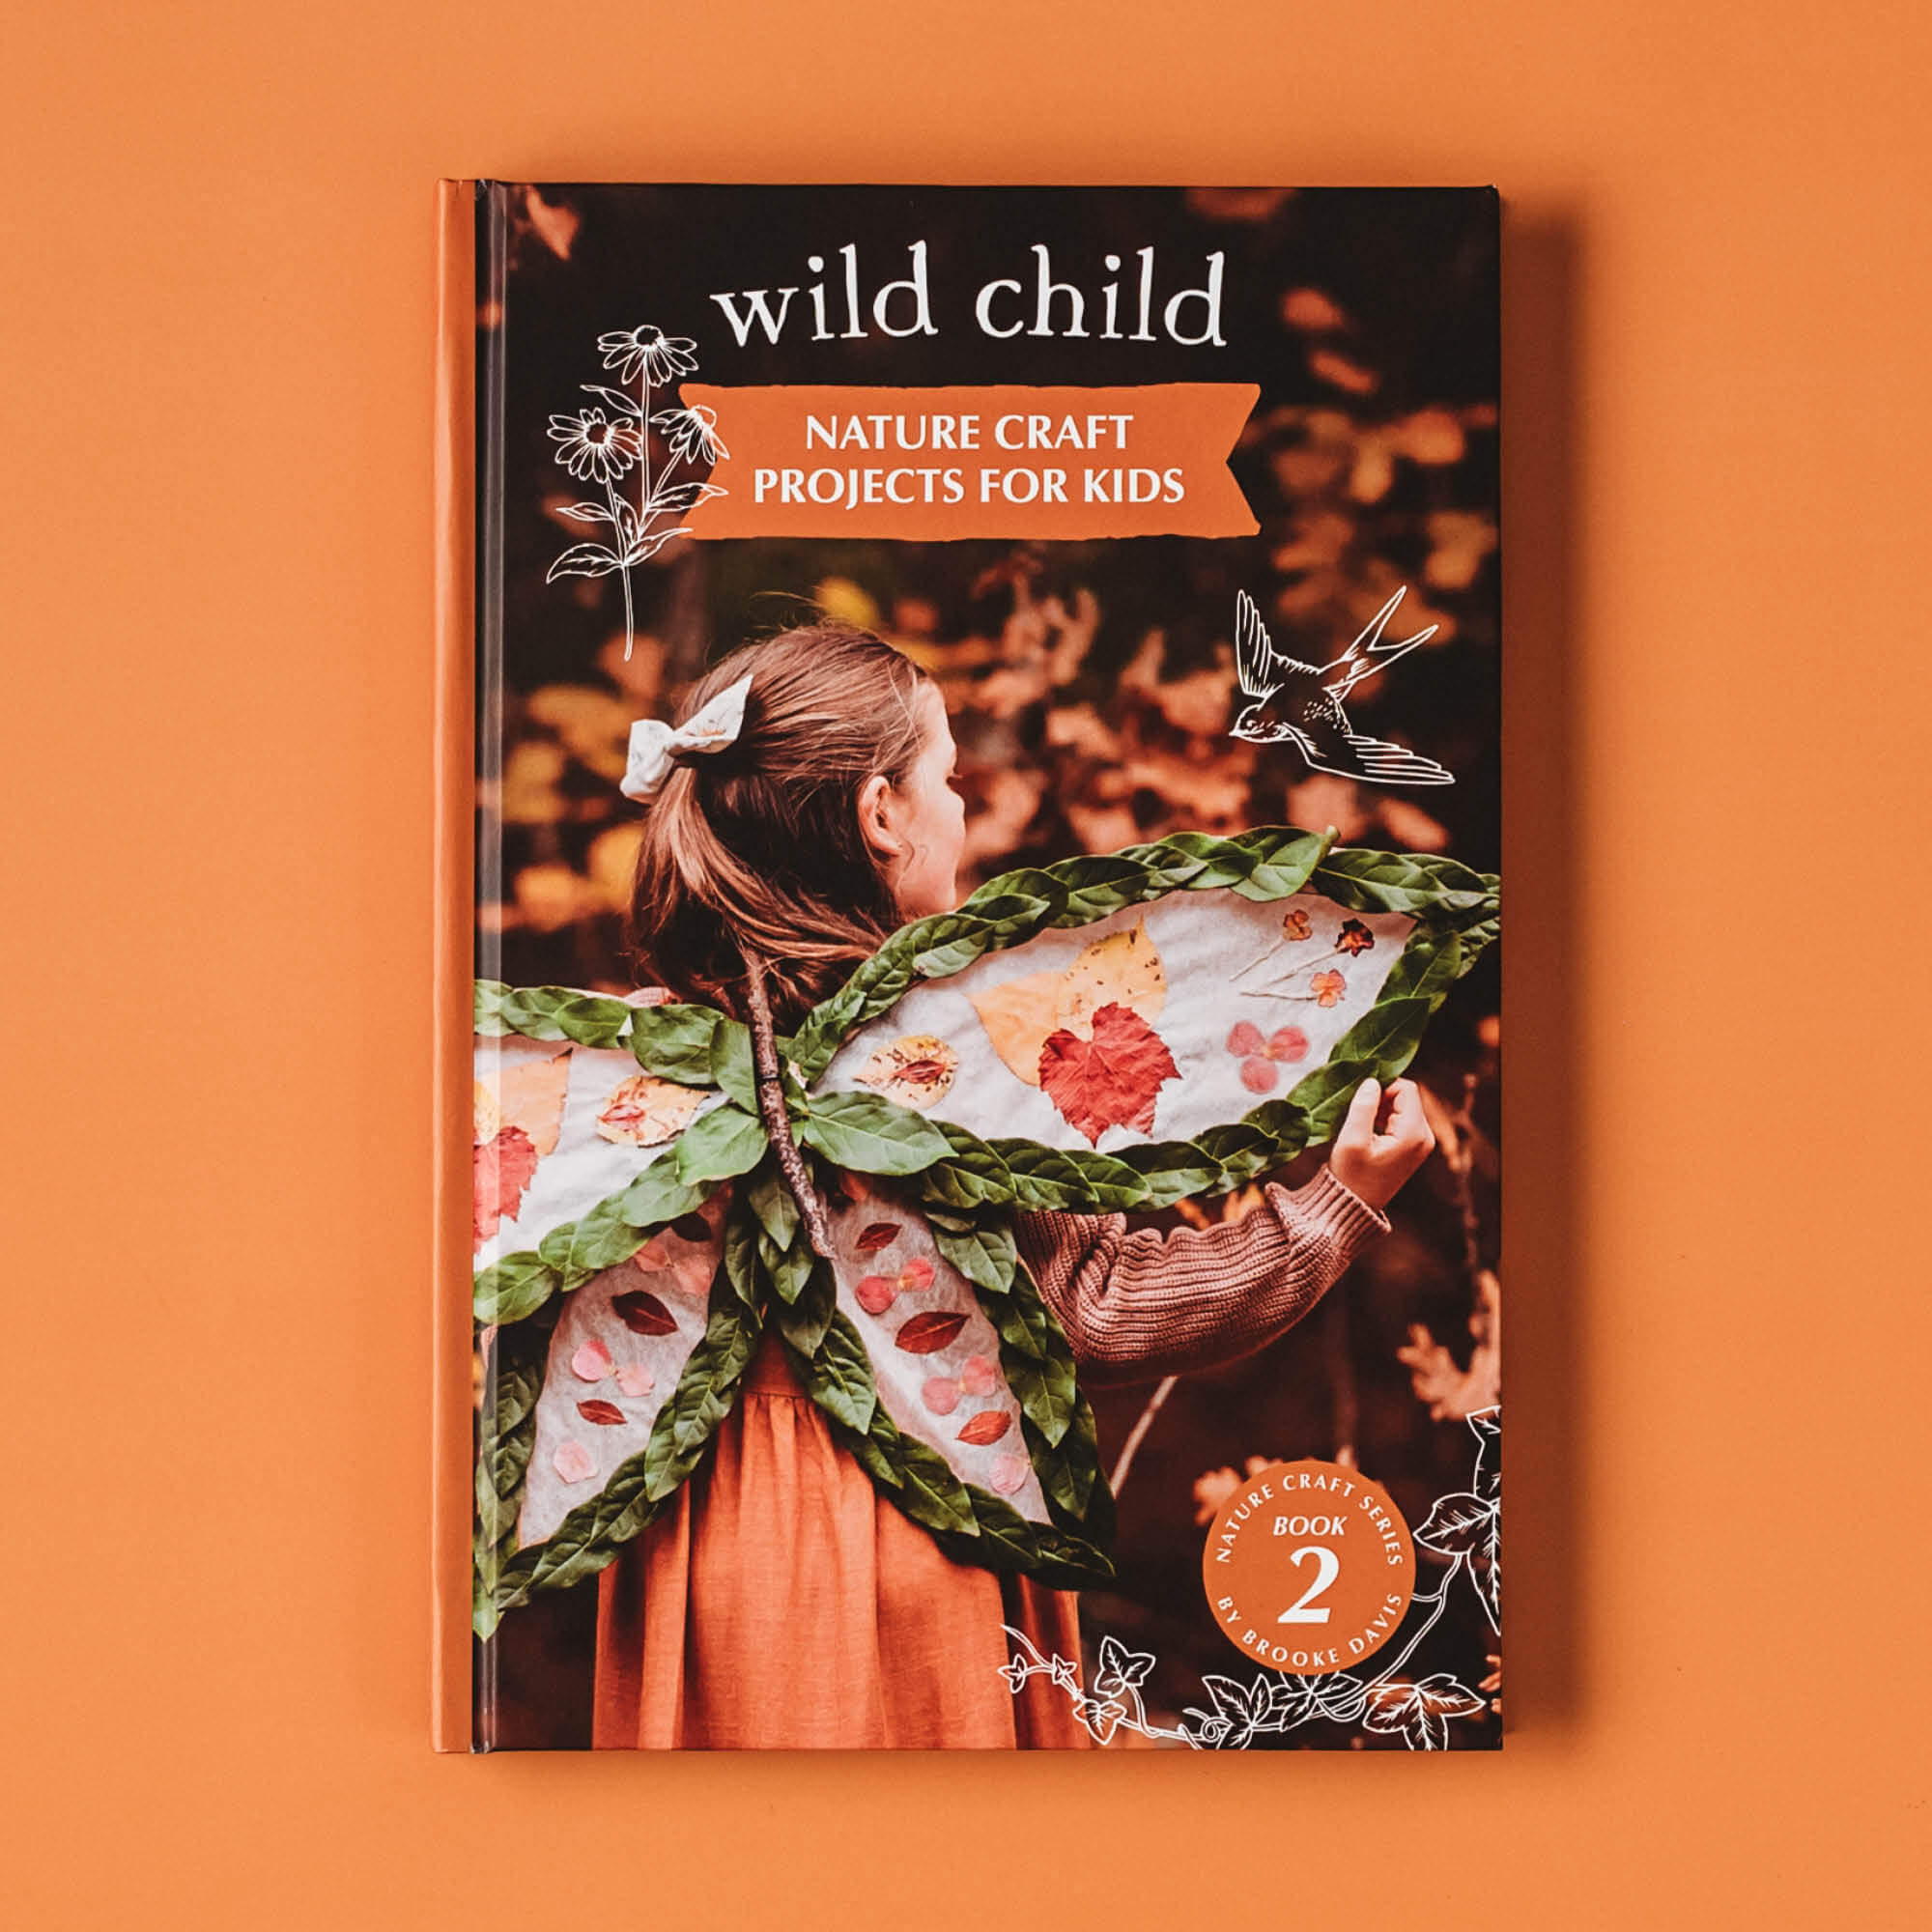 The Little Book of Whittling - Wild Kids Company